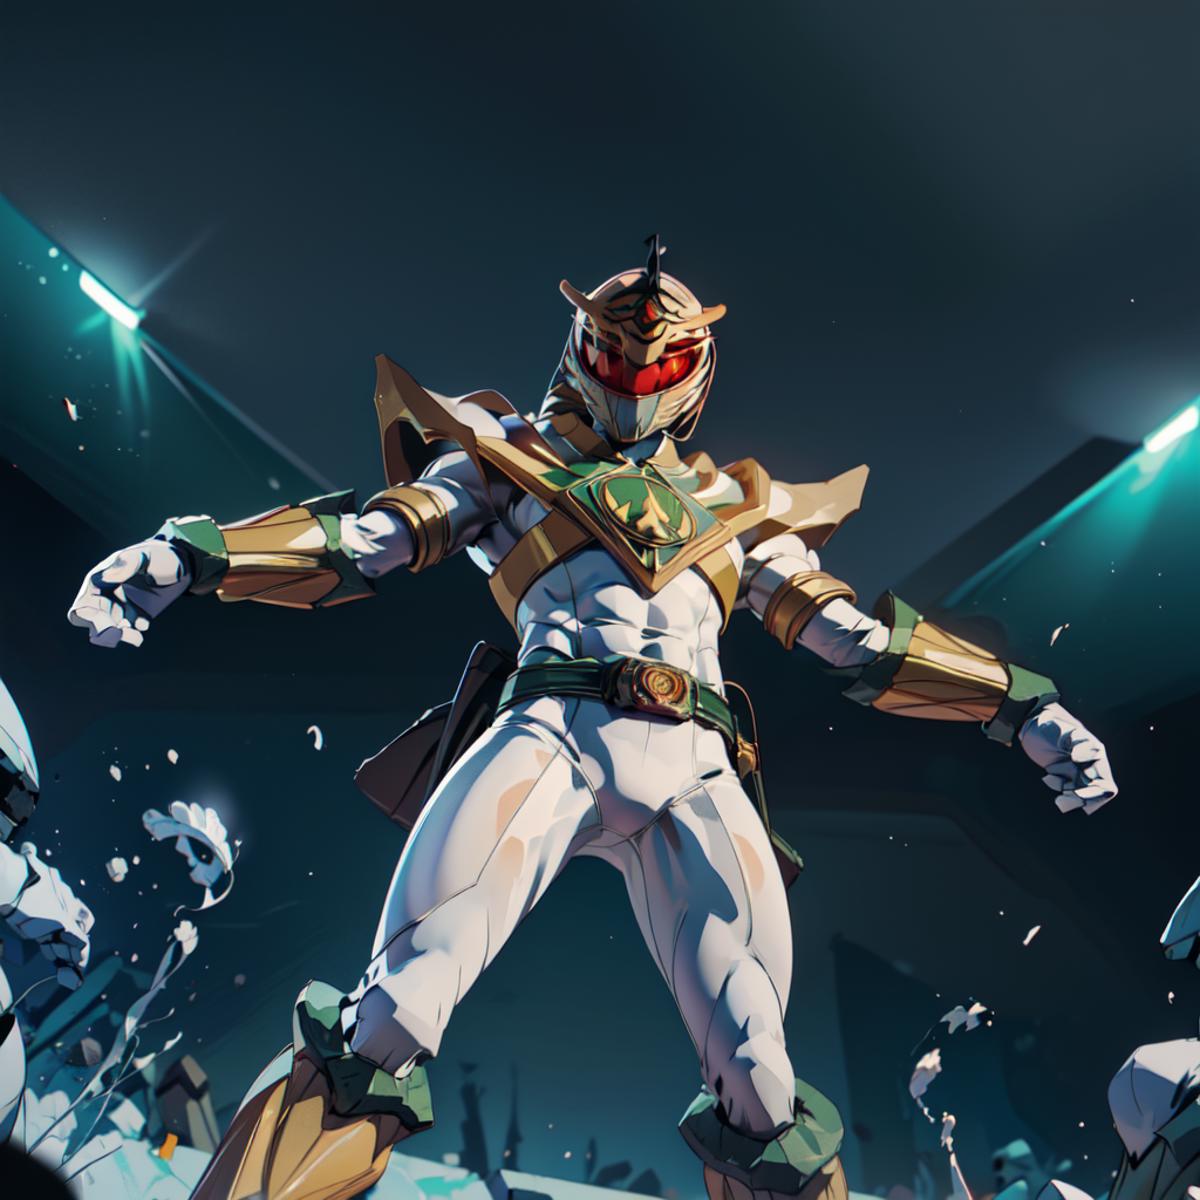 Lord Drakkon | Power Ranger Mighty Morphin The Shattered Grid image by Maxx_